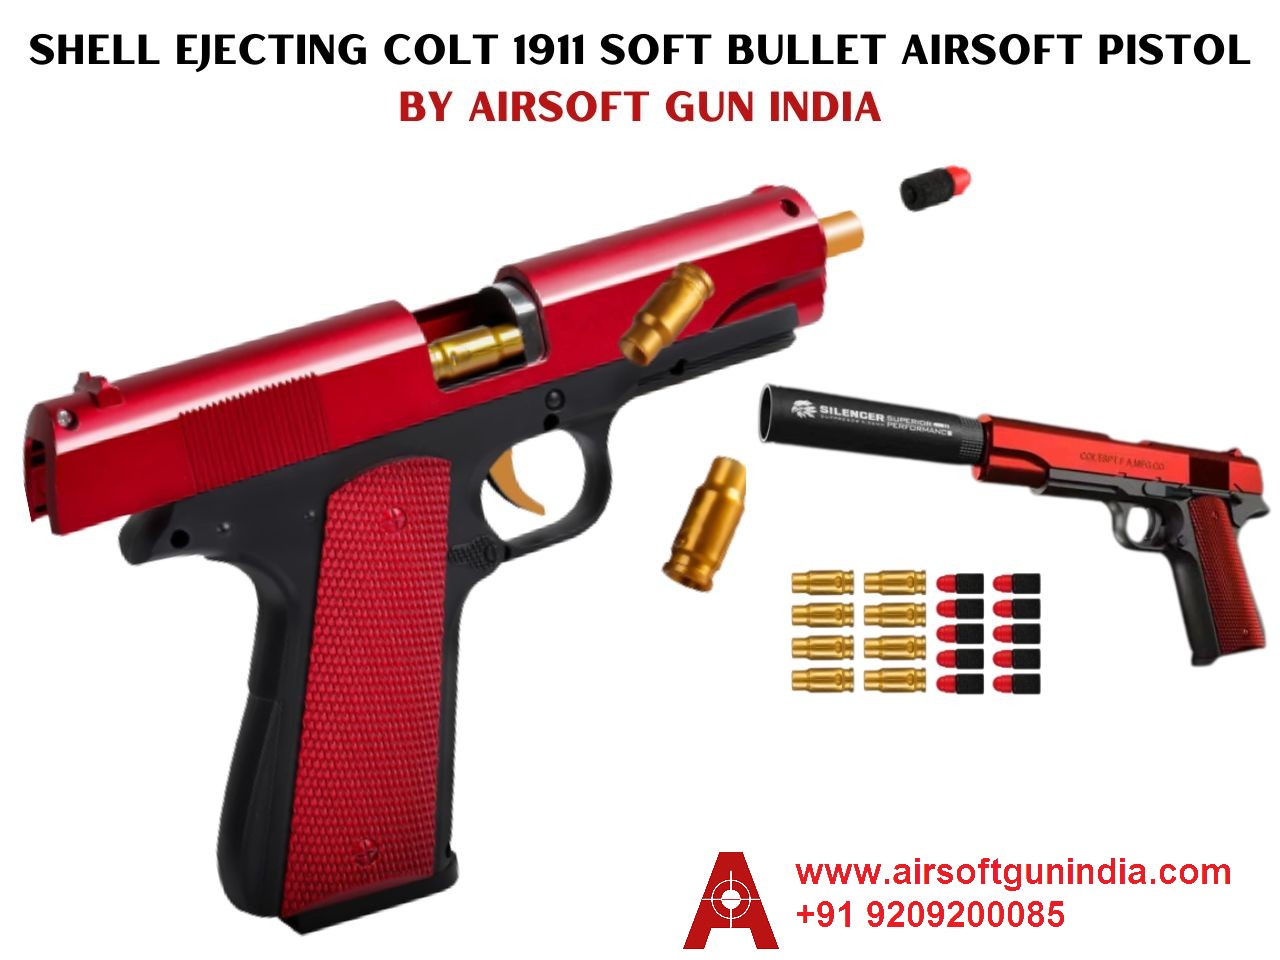 Shell Ejecting Colt-1911 Soft Bullet Airsoft Pistol